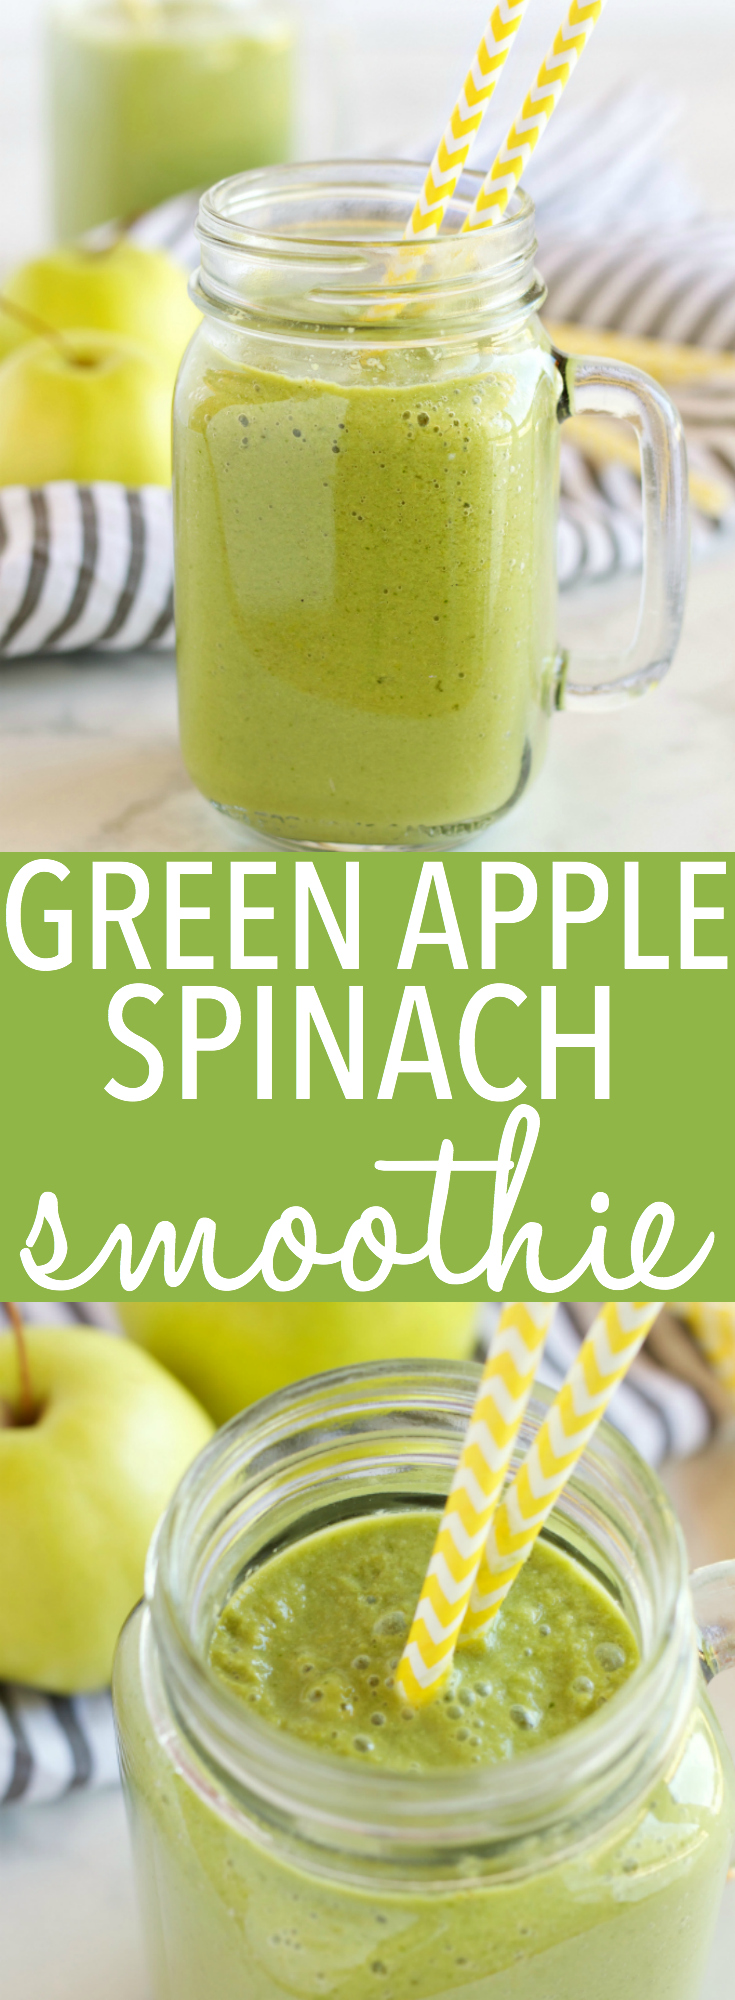 This Green Apple Spinach Smoothie is a sweet and healthy way to start the day! It makes a delicious breakfast packed with nutrients and fibre, and it's a great wholesome snack any time of the day! It can be made vegan and dairy-free! Recipe from thebusybaker.ca! #greensmoothie #applesmoothie #healthysmoothie #dairyfreesmoothie #dairyfreebreakfast via @busybakerblog